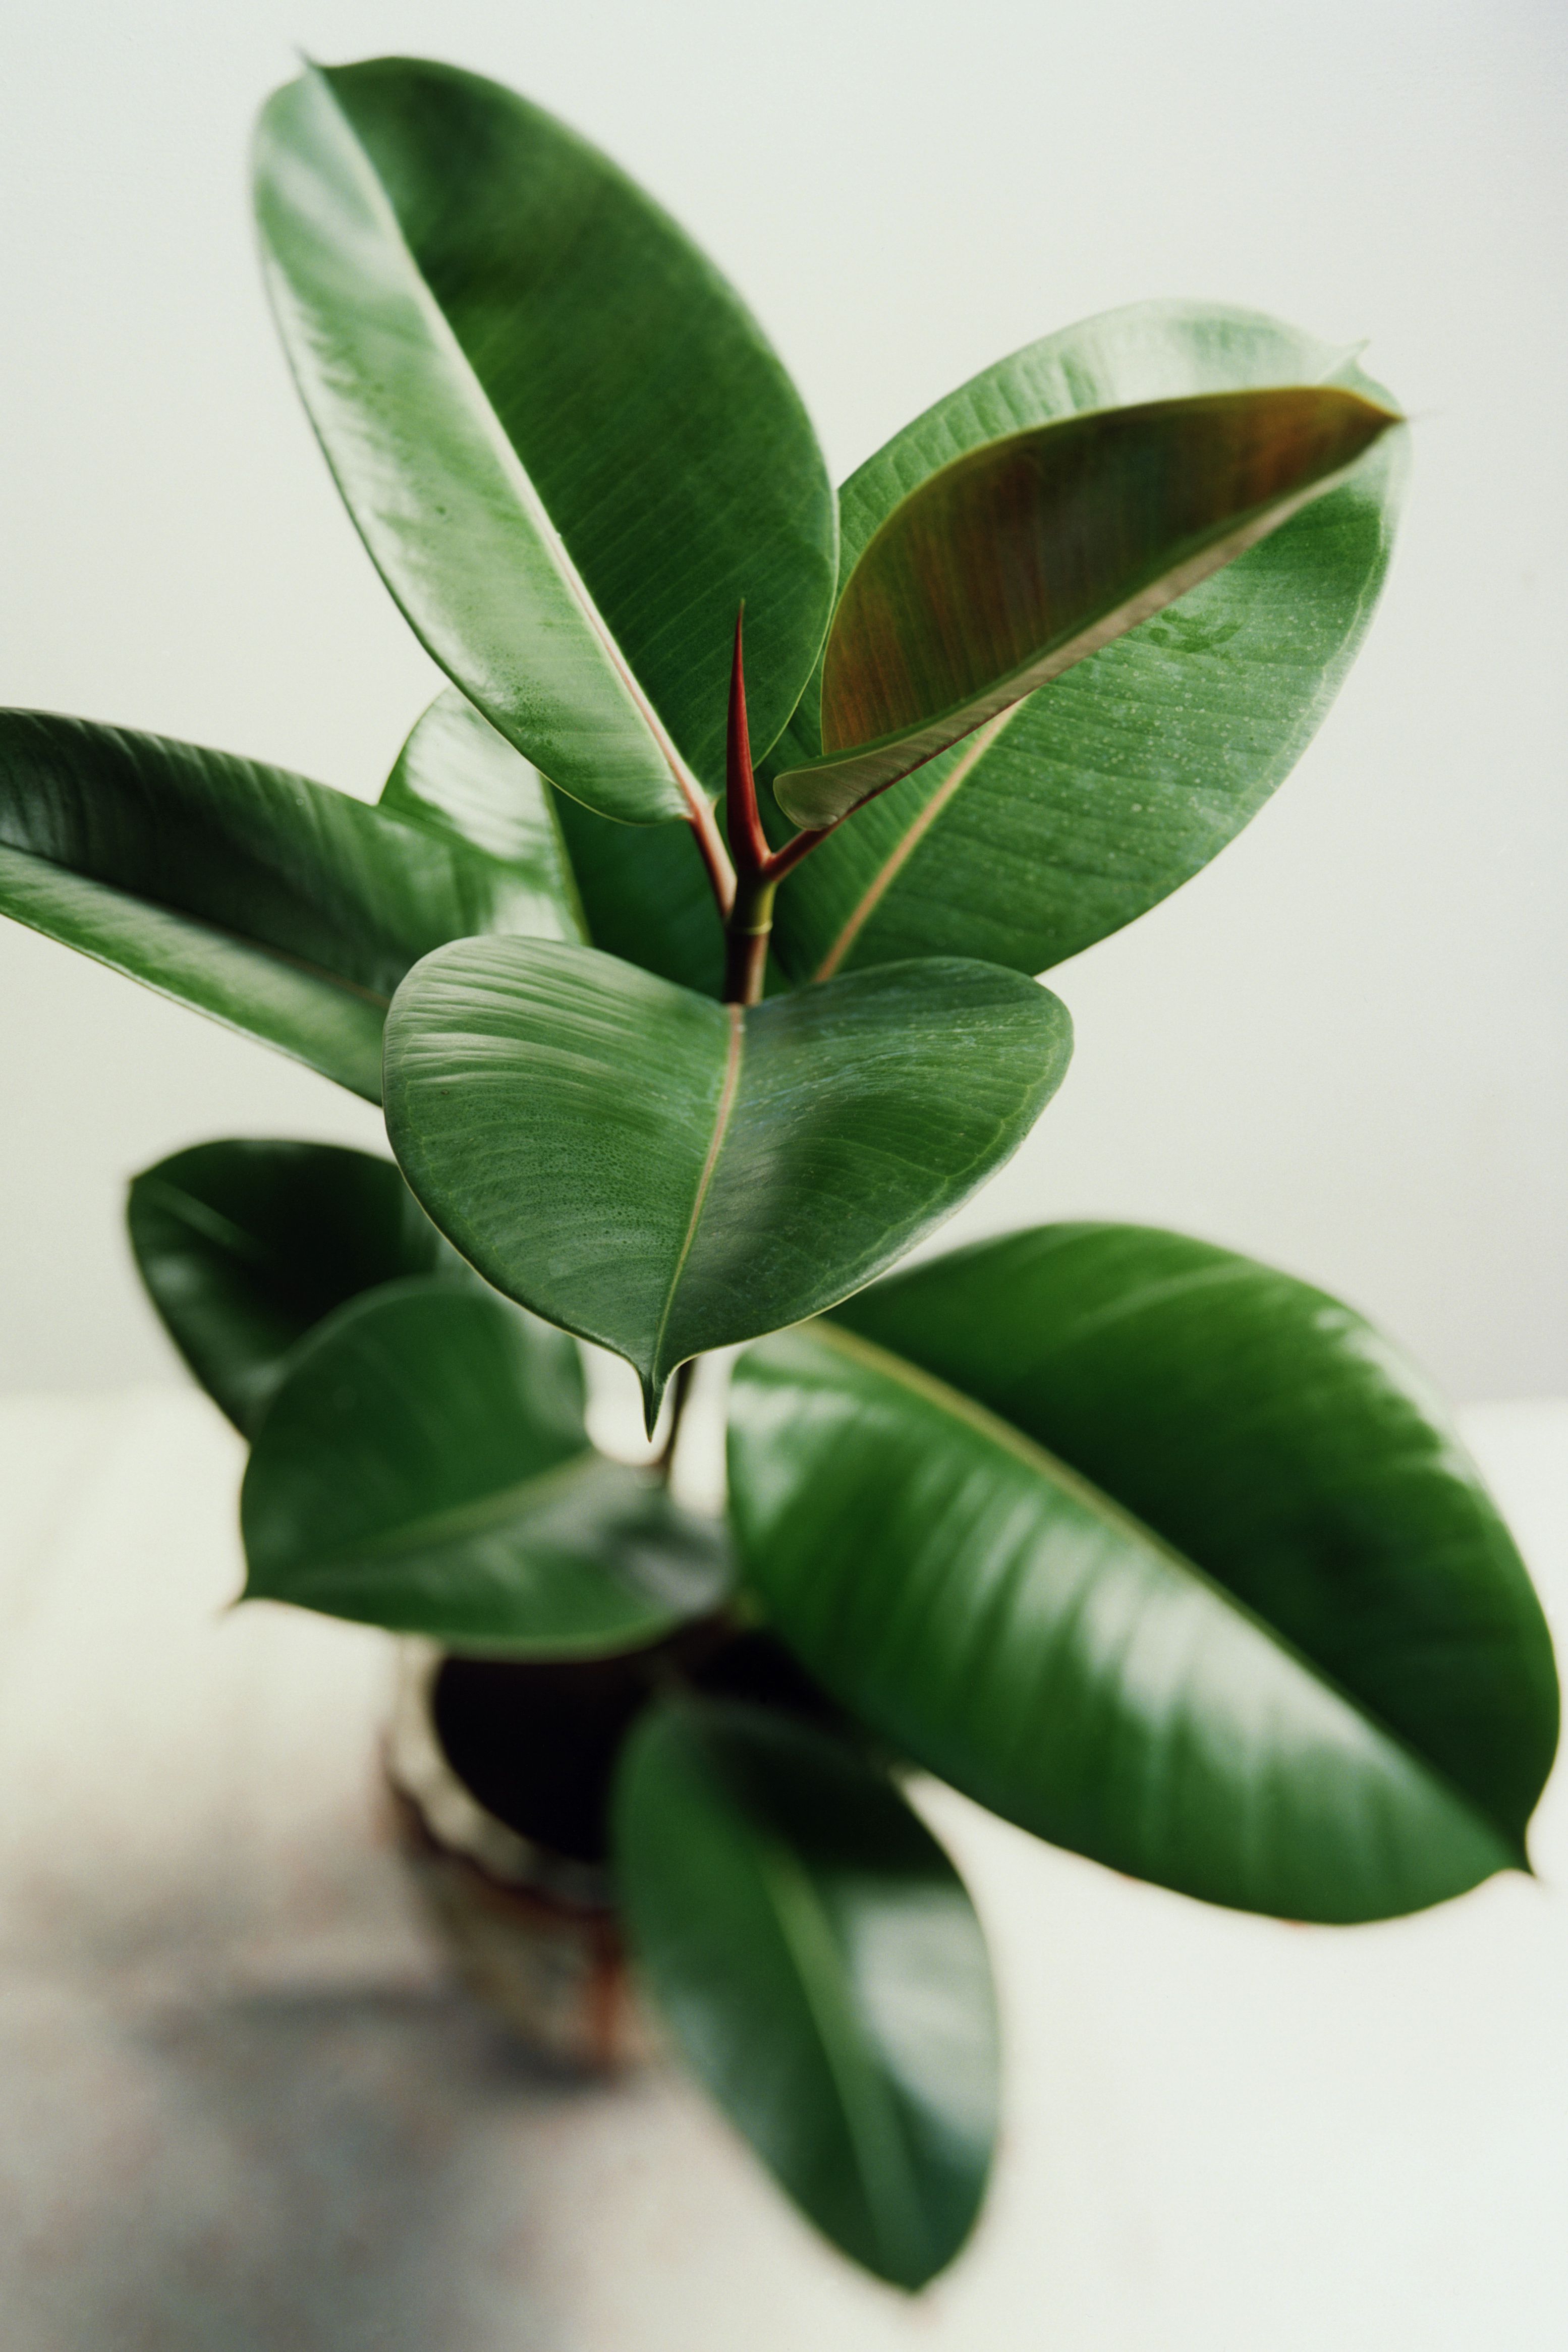 25 Easy Houseplants - Easy To Care For Indoor Plants